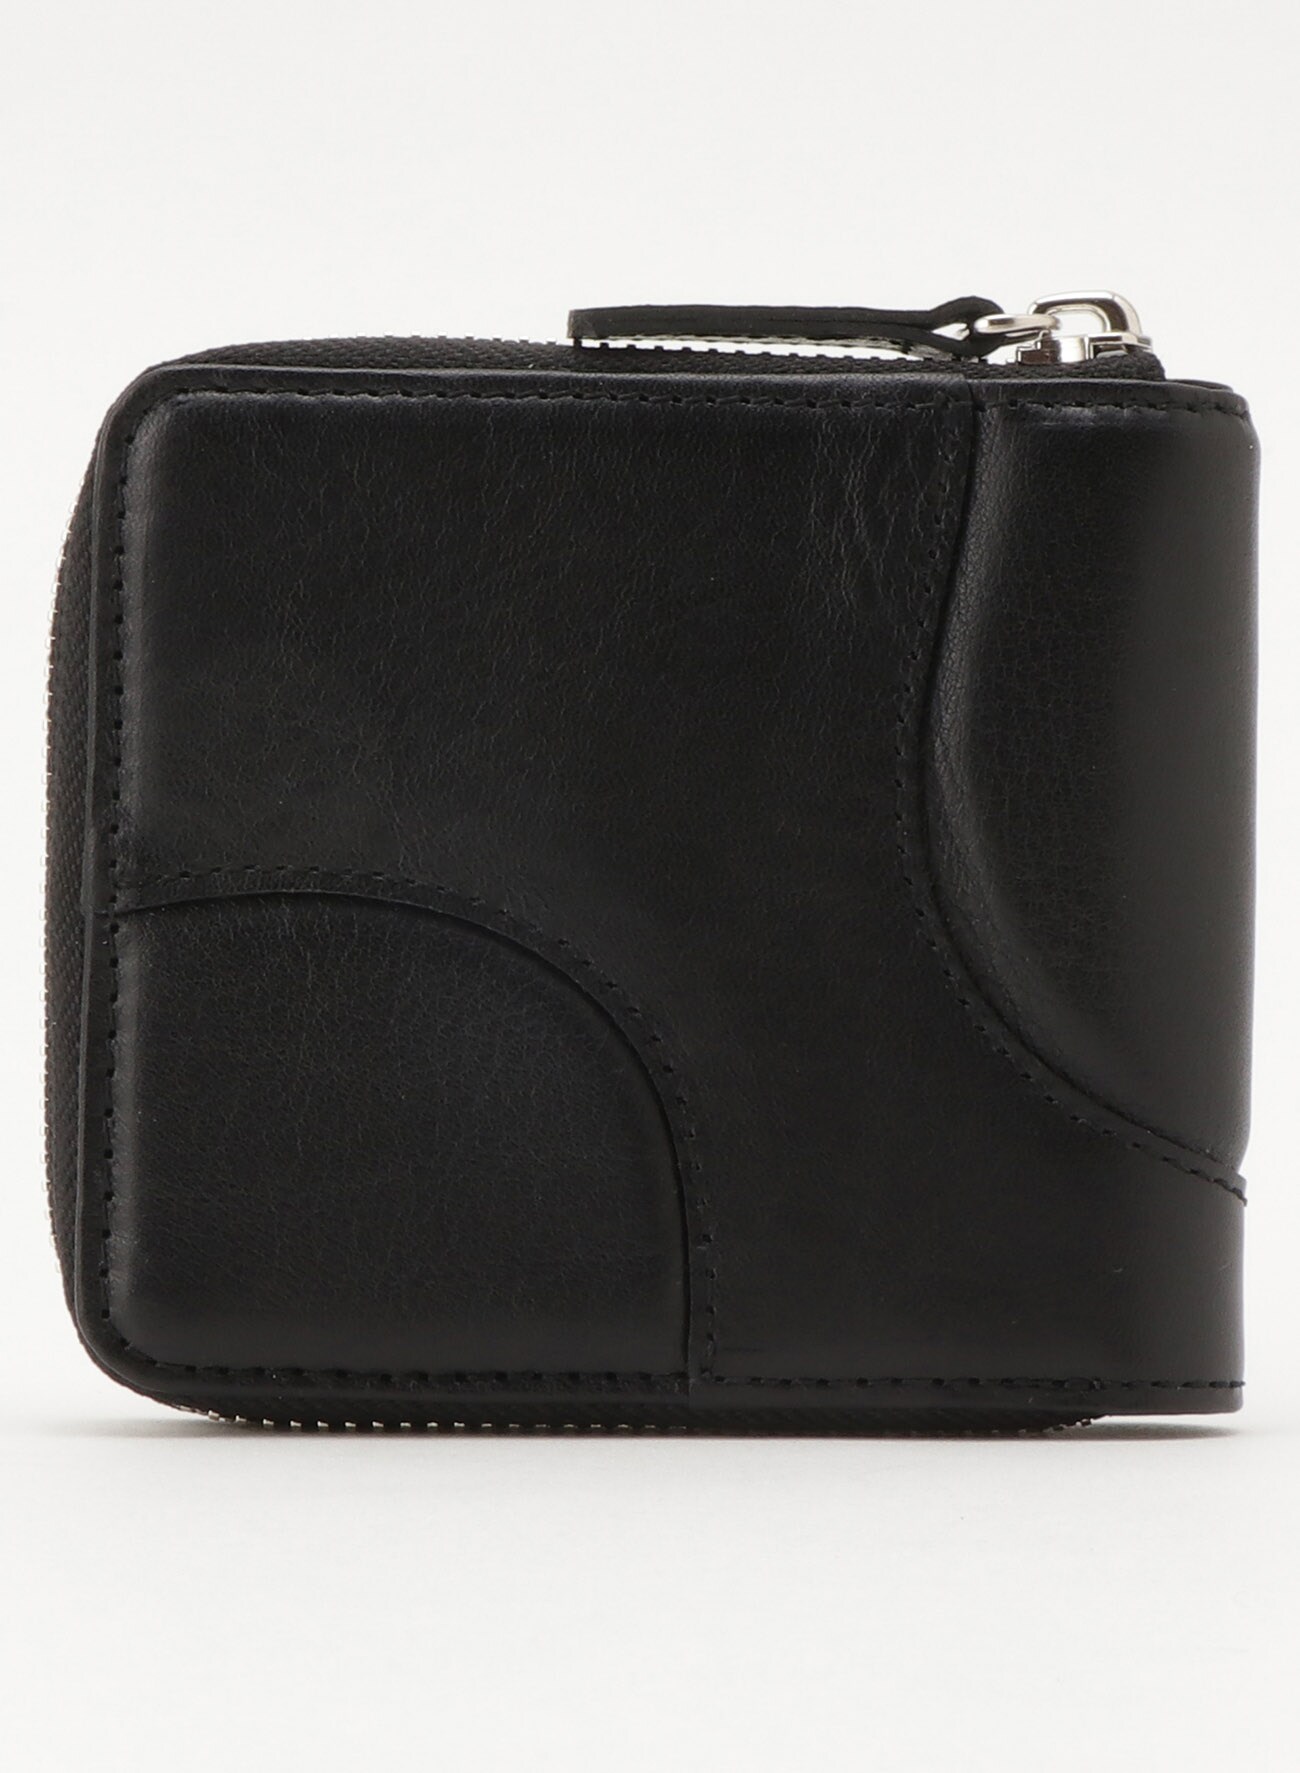 SOFT STEER 3 WAYS PATCHED WORK WALLET